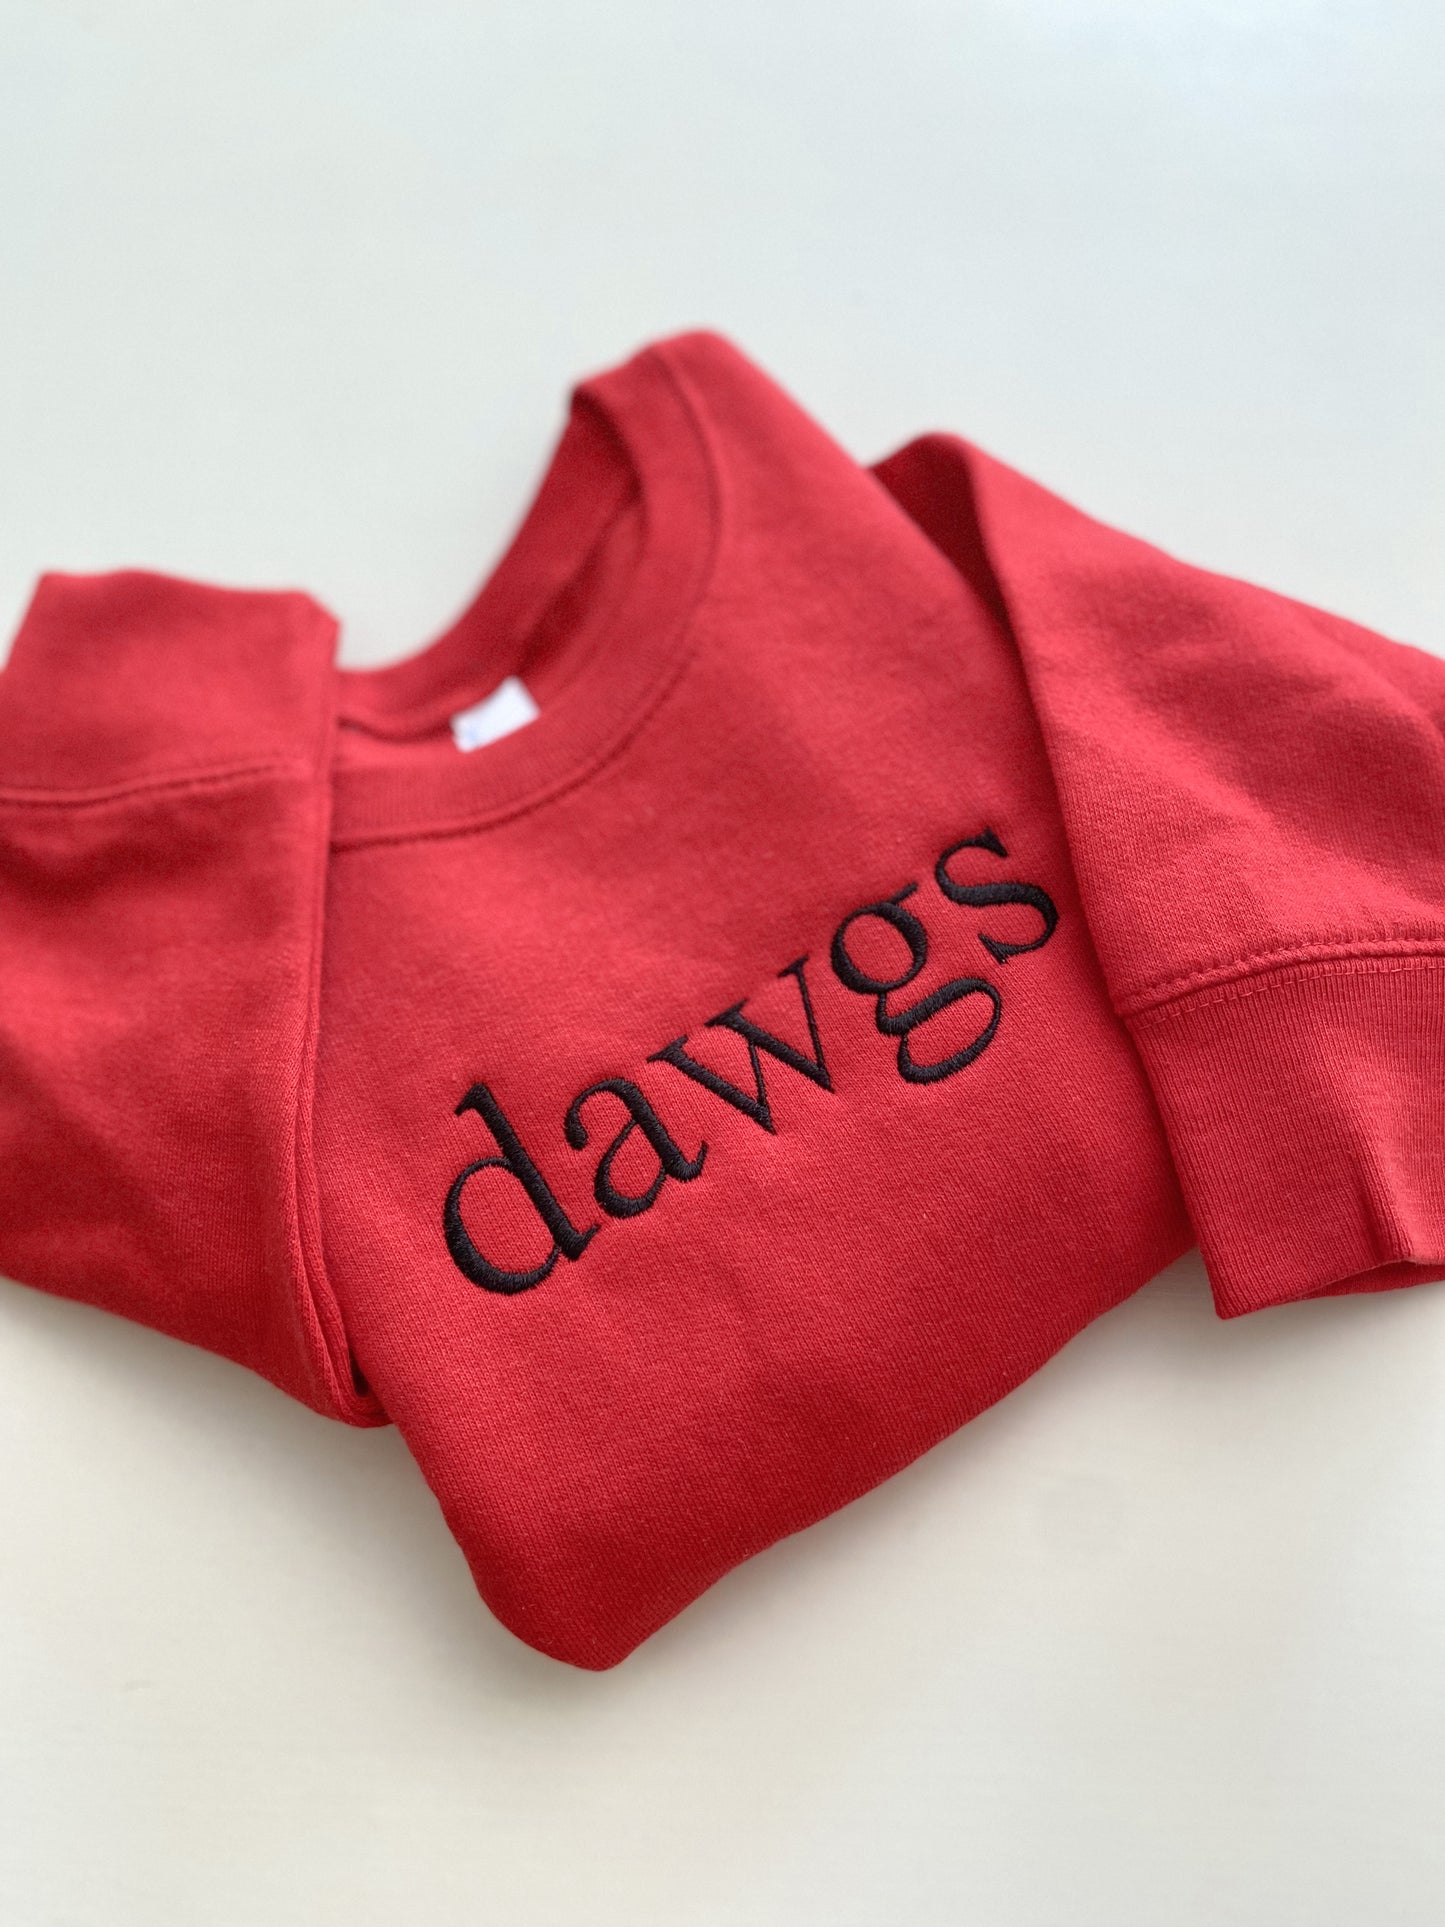 Kids Name Sweatshirt -- Embroidered, Toddler, + Youth Sizes